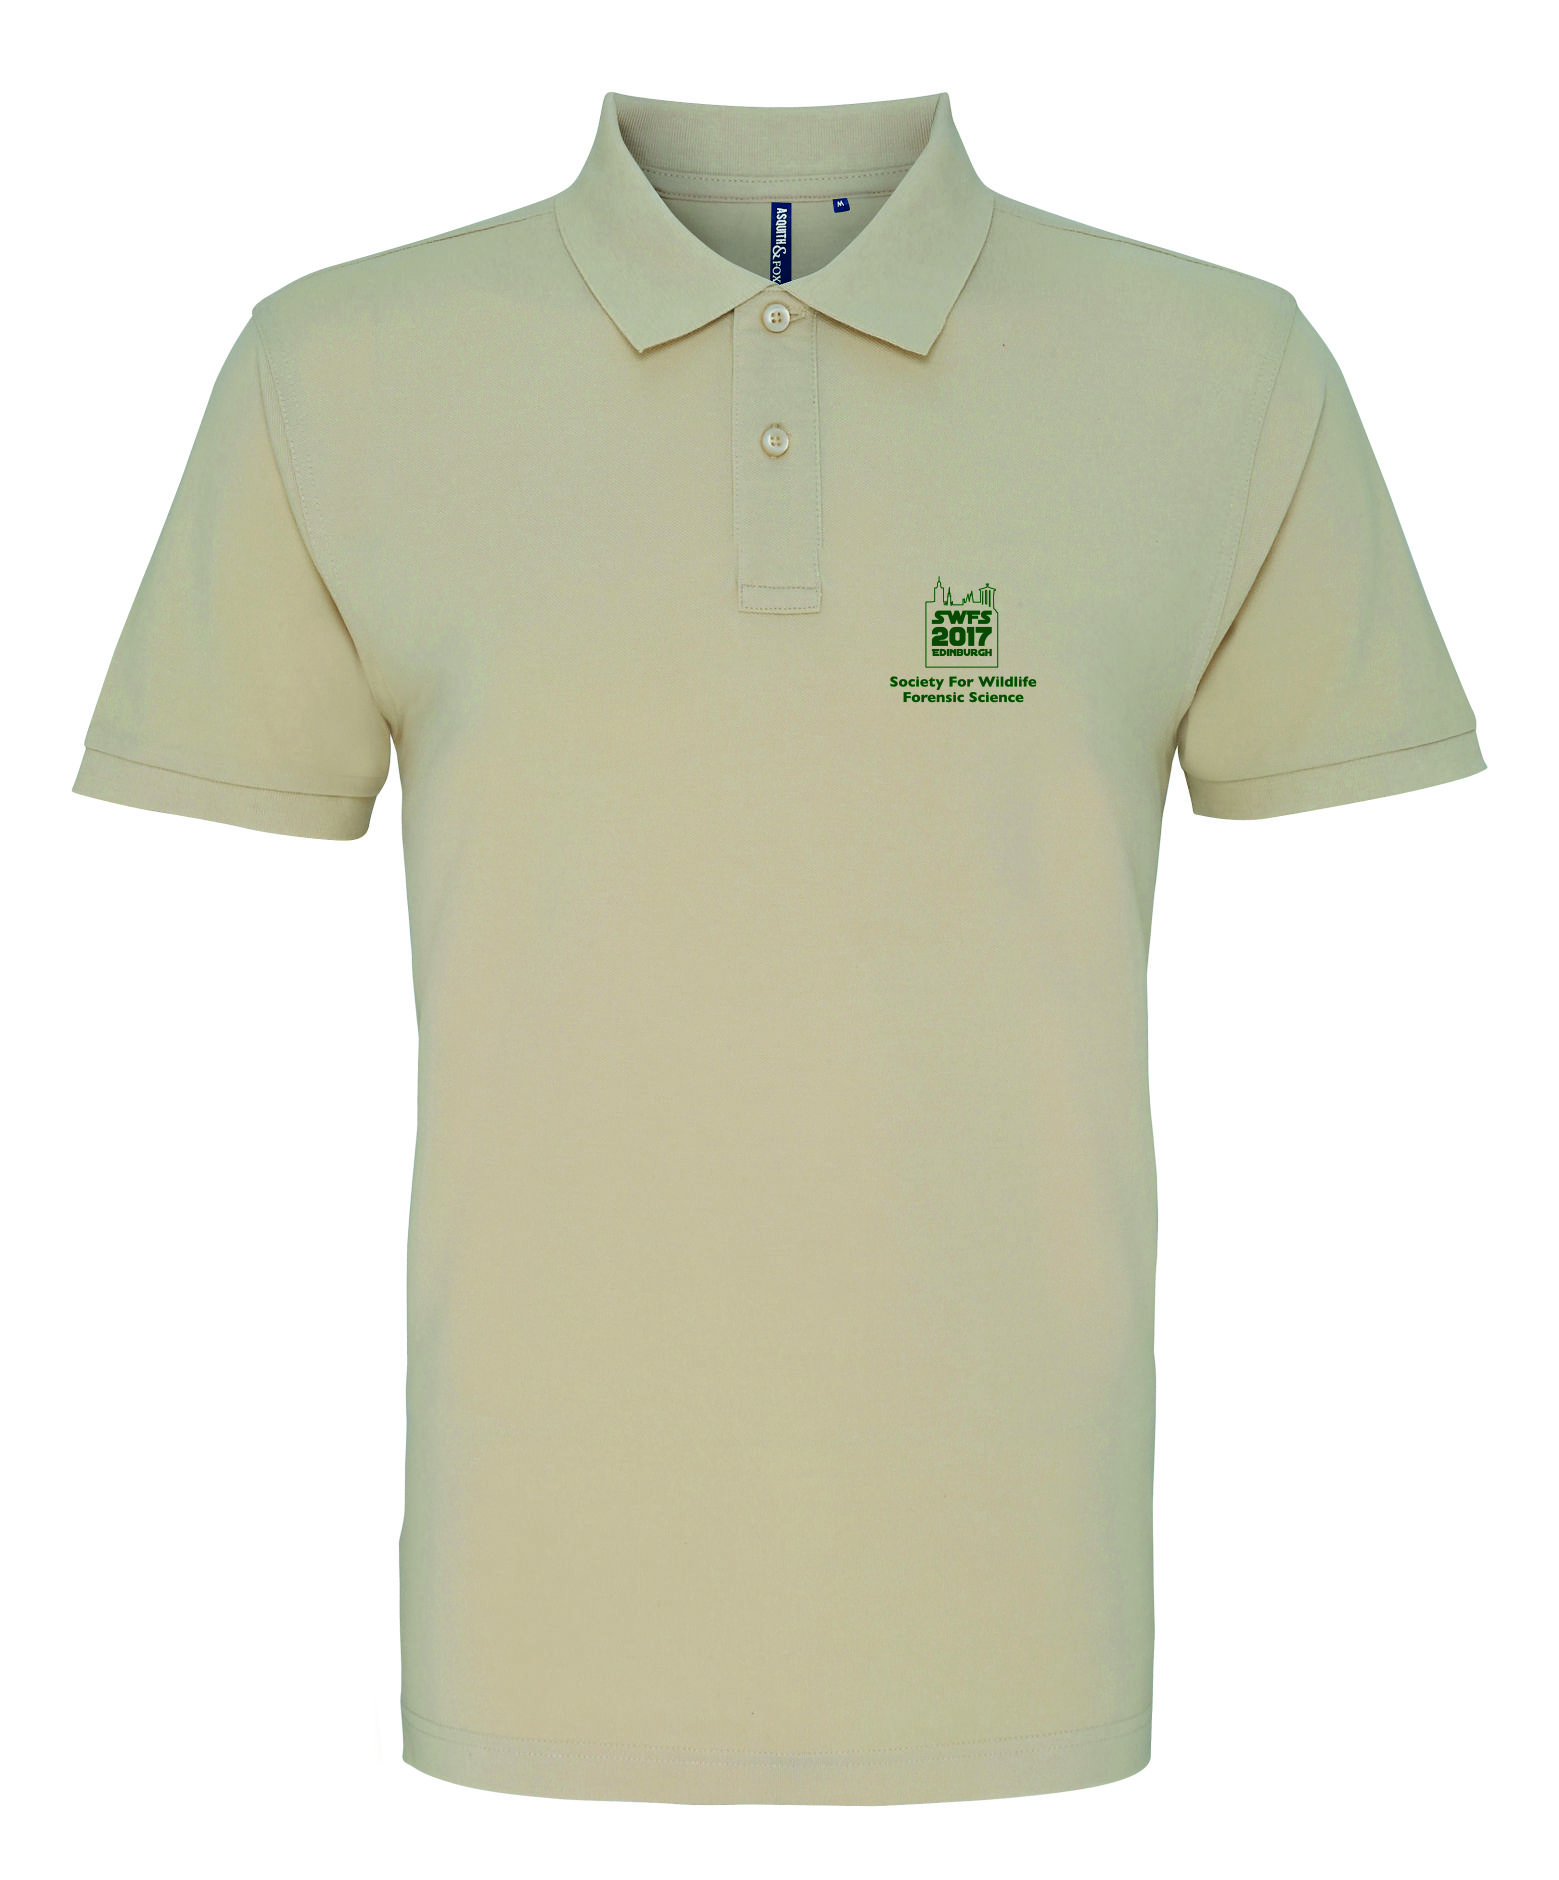 Society for Wildlife Forensic Science Polo – Natural | Society for ...